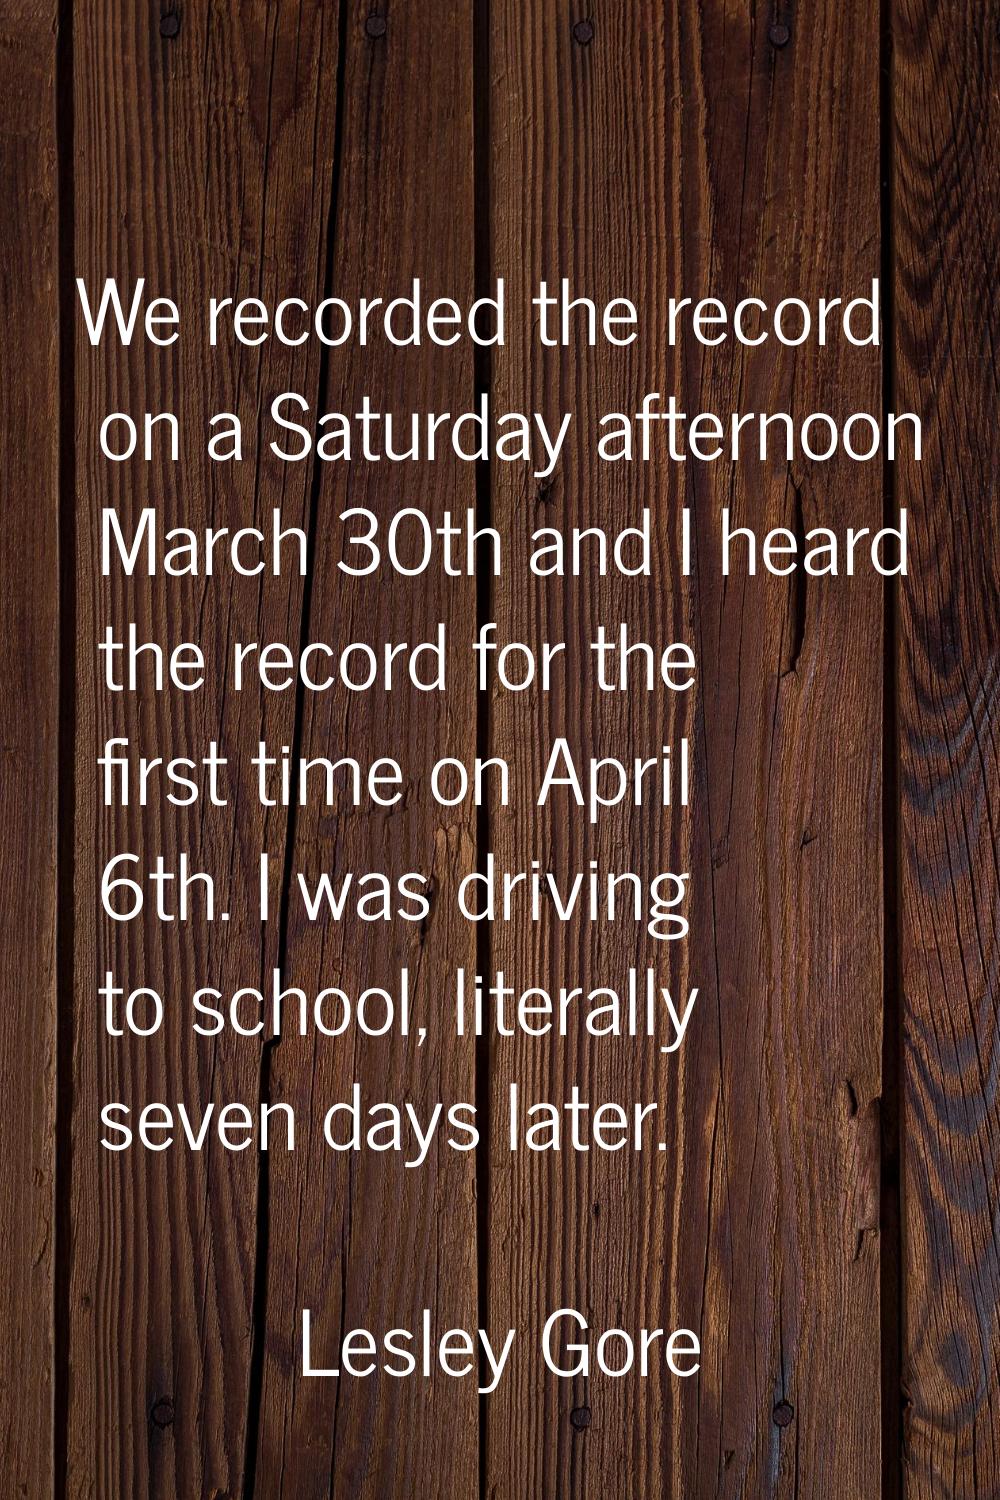 We recorded the record on a Saturday afternoon March 30th and I heard the record for the first time